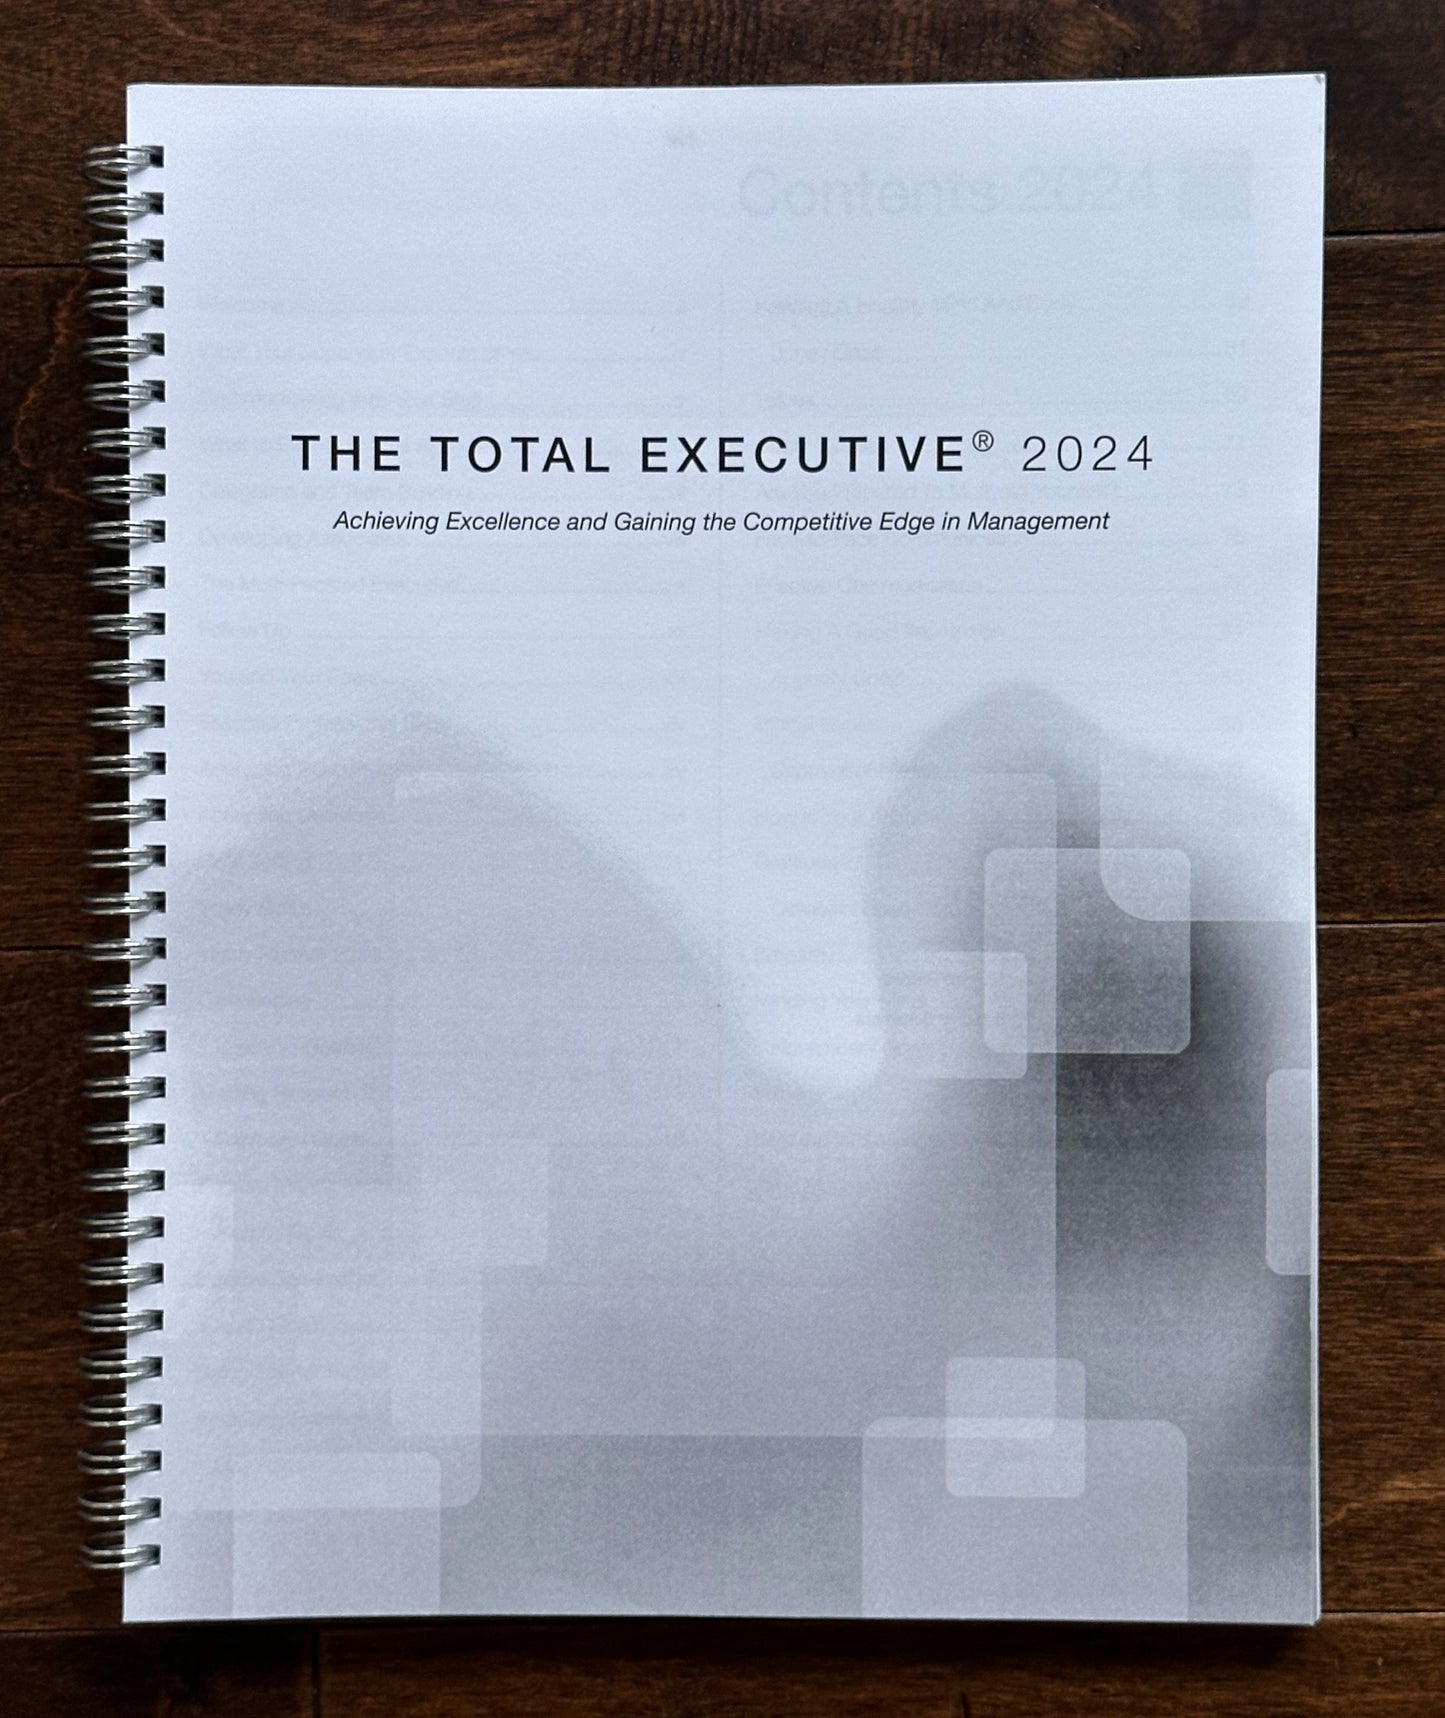 THE TOTAL EXECUTIVE®